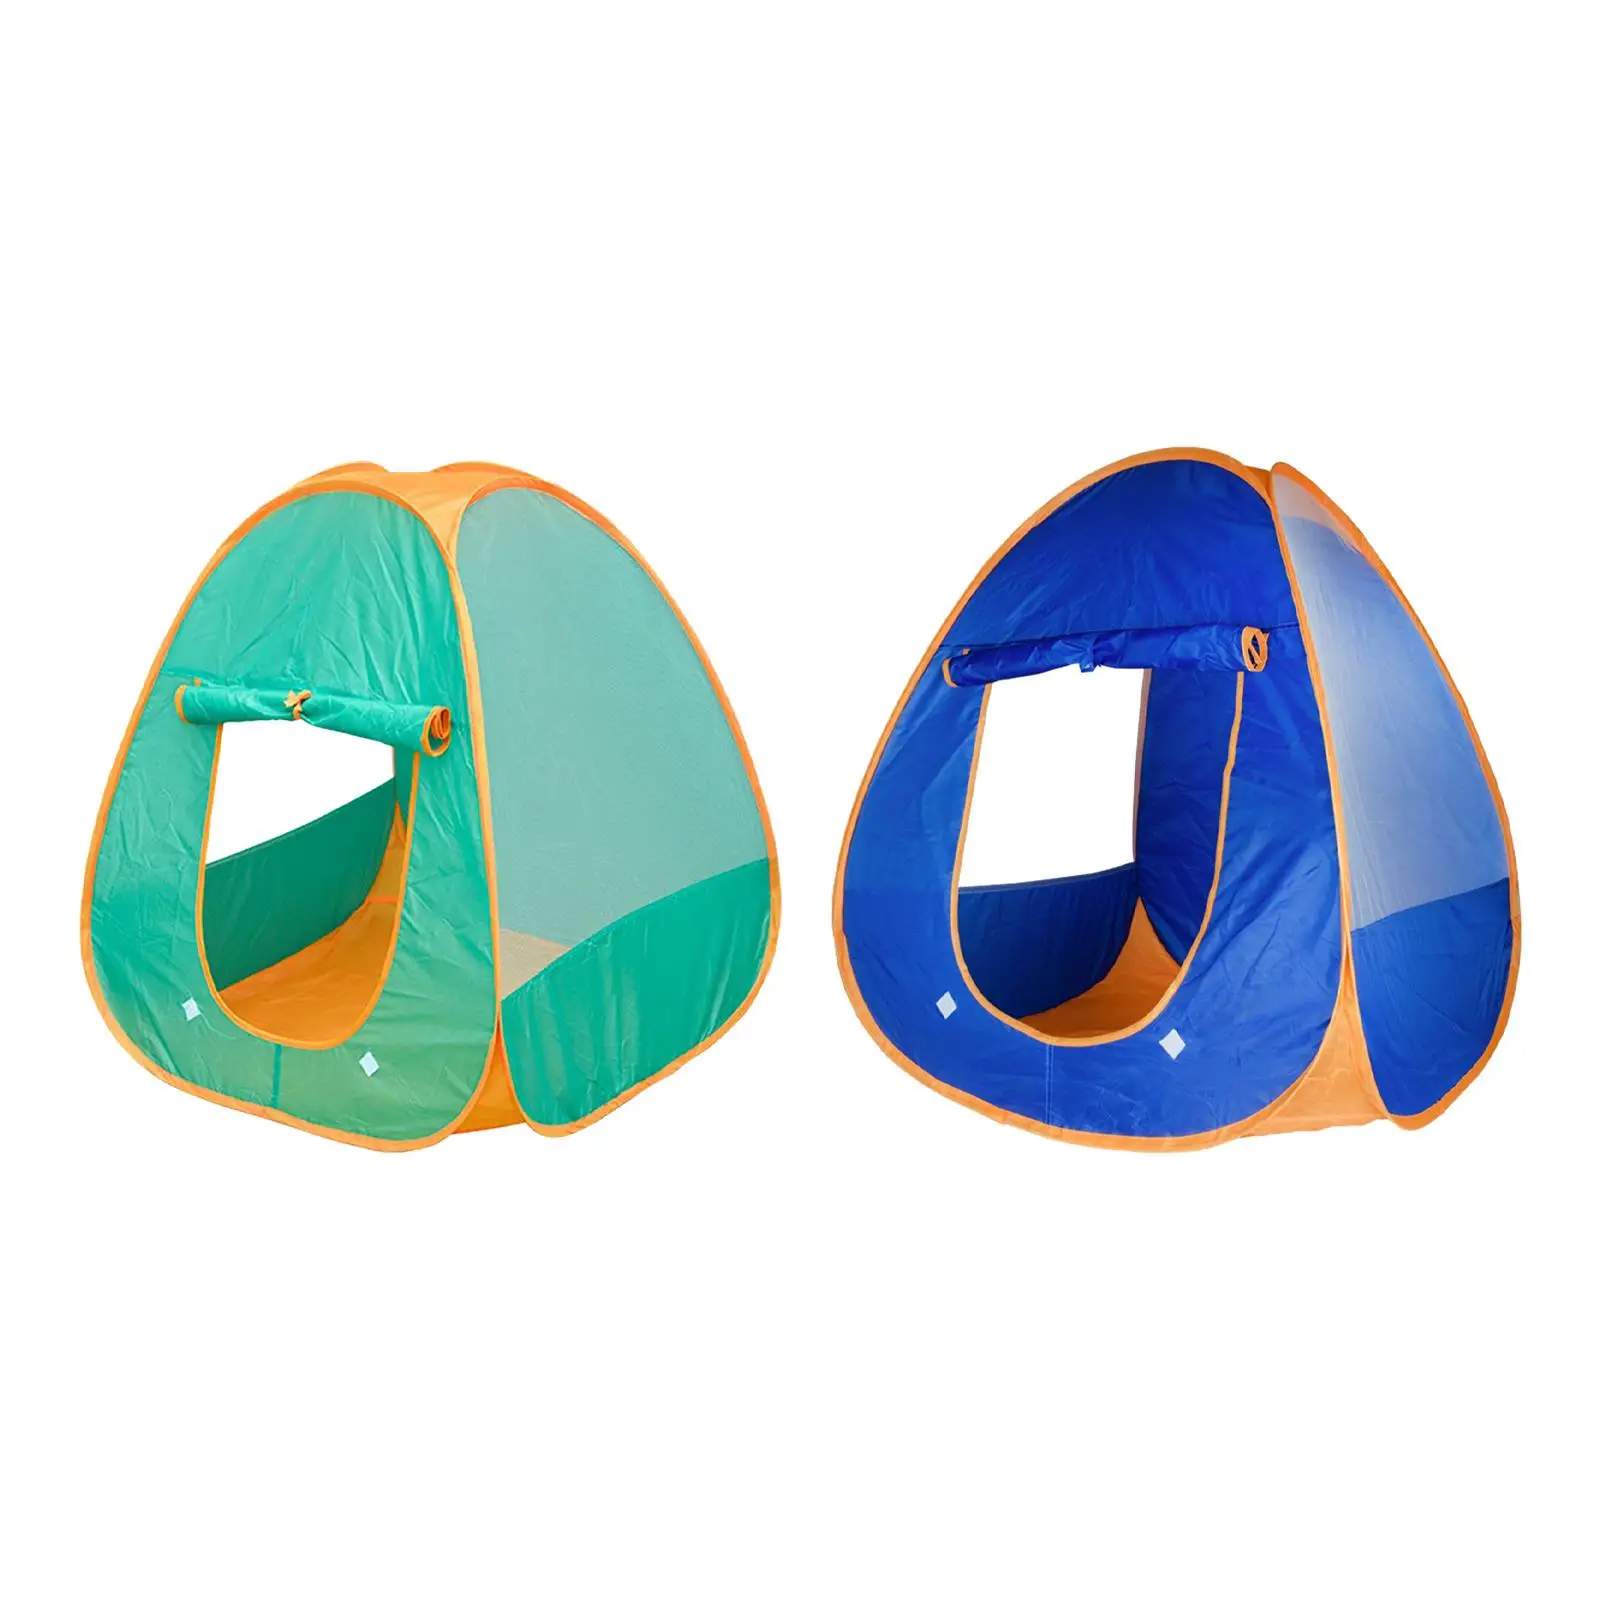 Children Play Tent Collapsible Role Play Toy for Nursery Room Indoor Outdoor